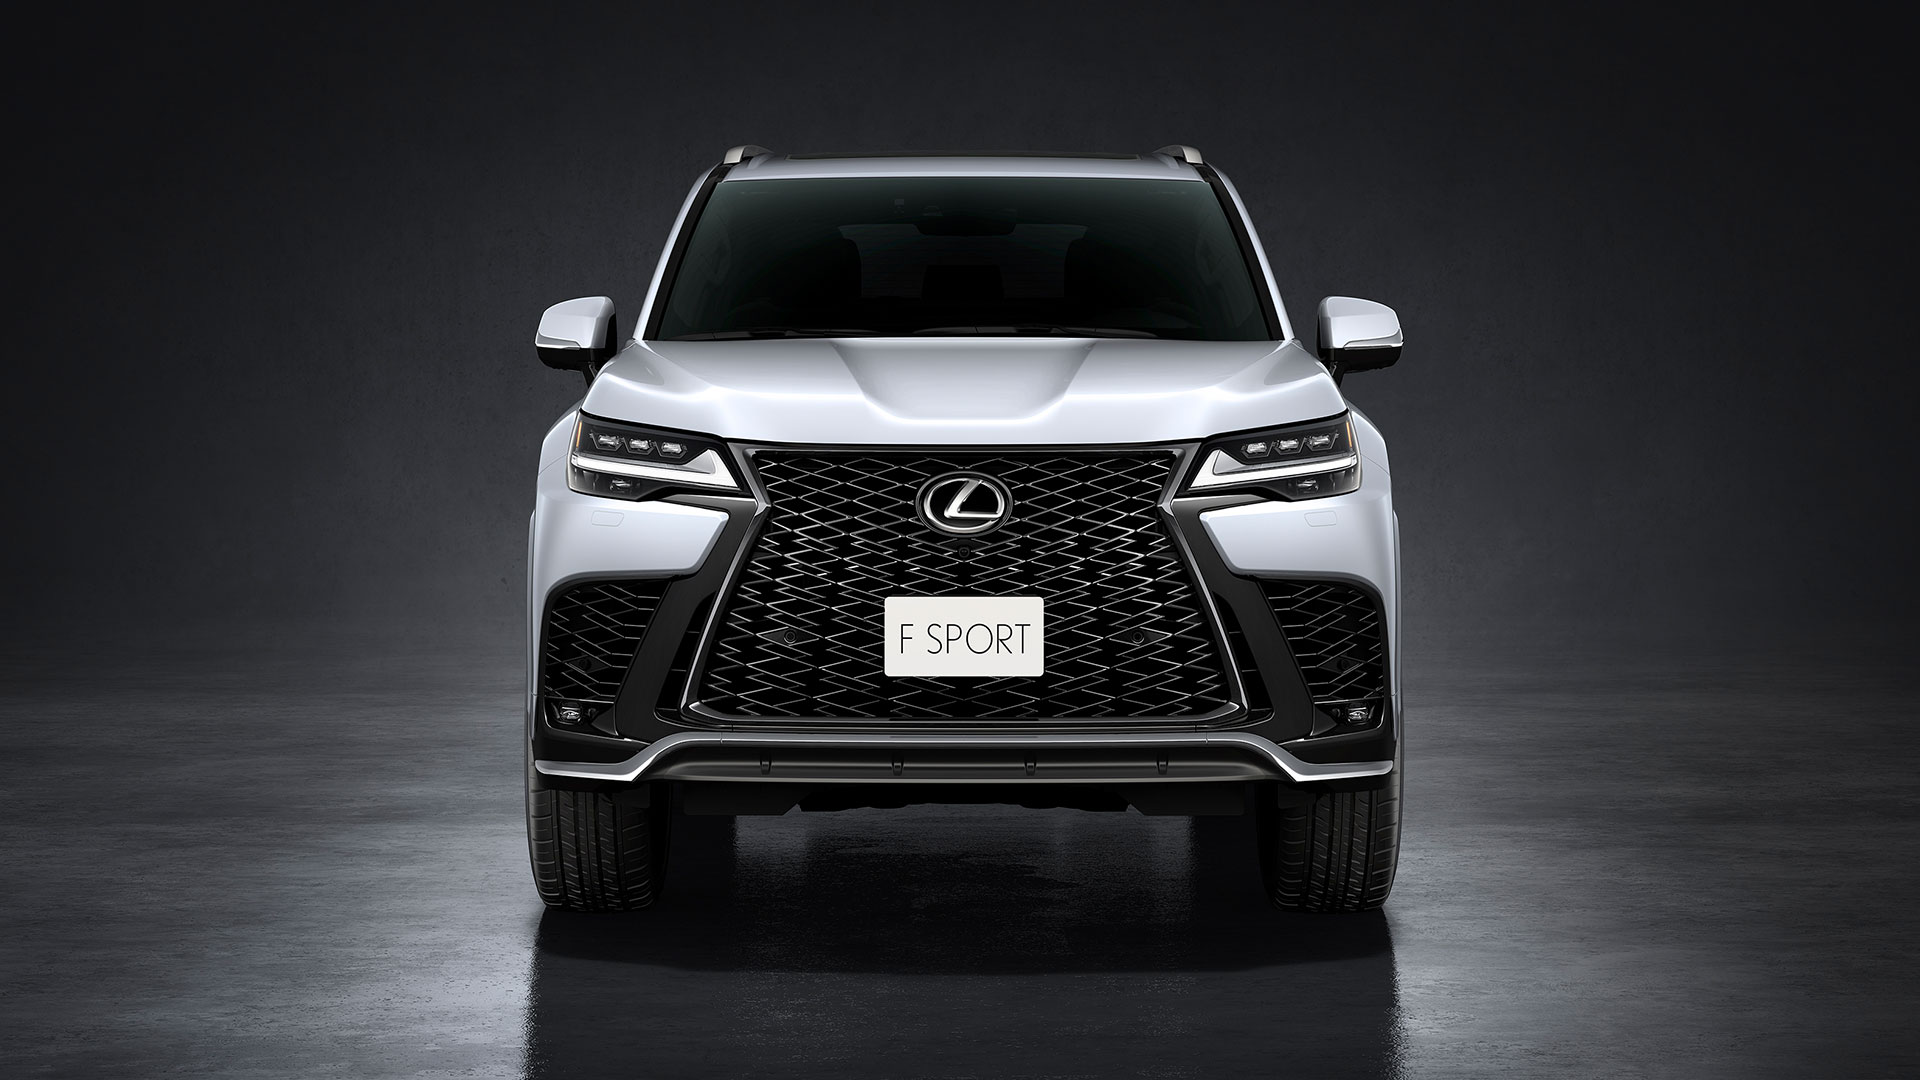 The all-new Lexus LX F Sport. (Overseas pre-production model shown. Australian grades, features & specifications may differ.)